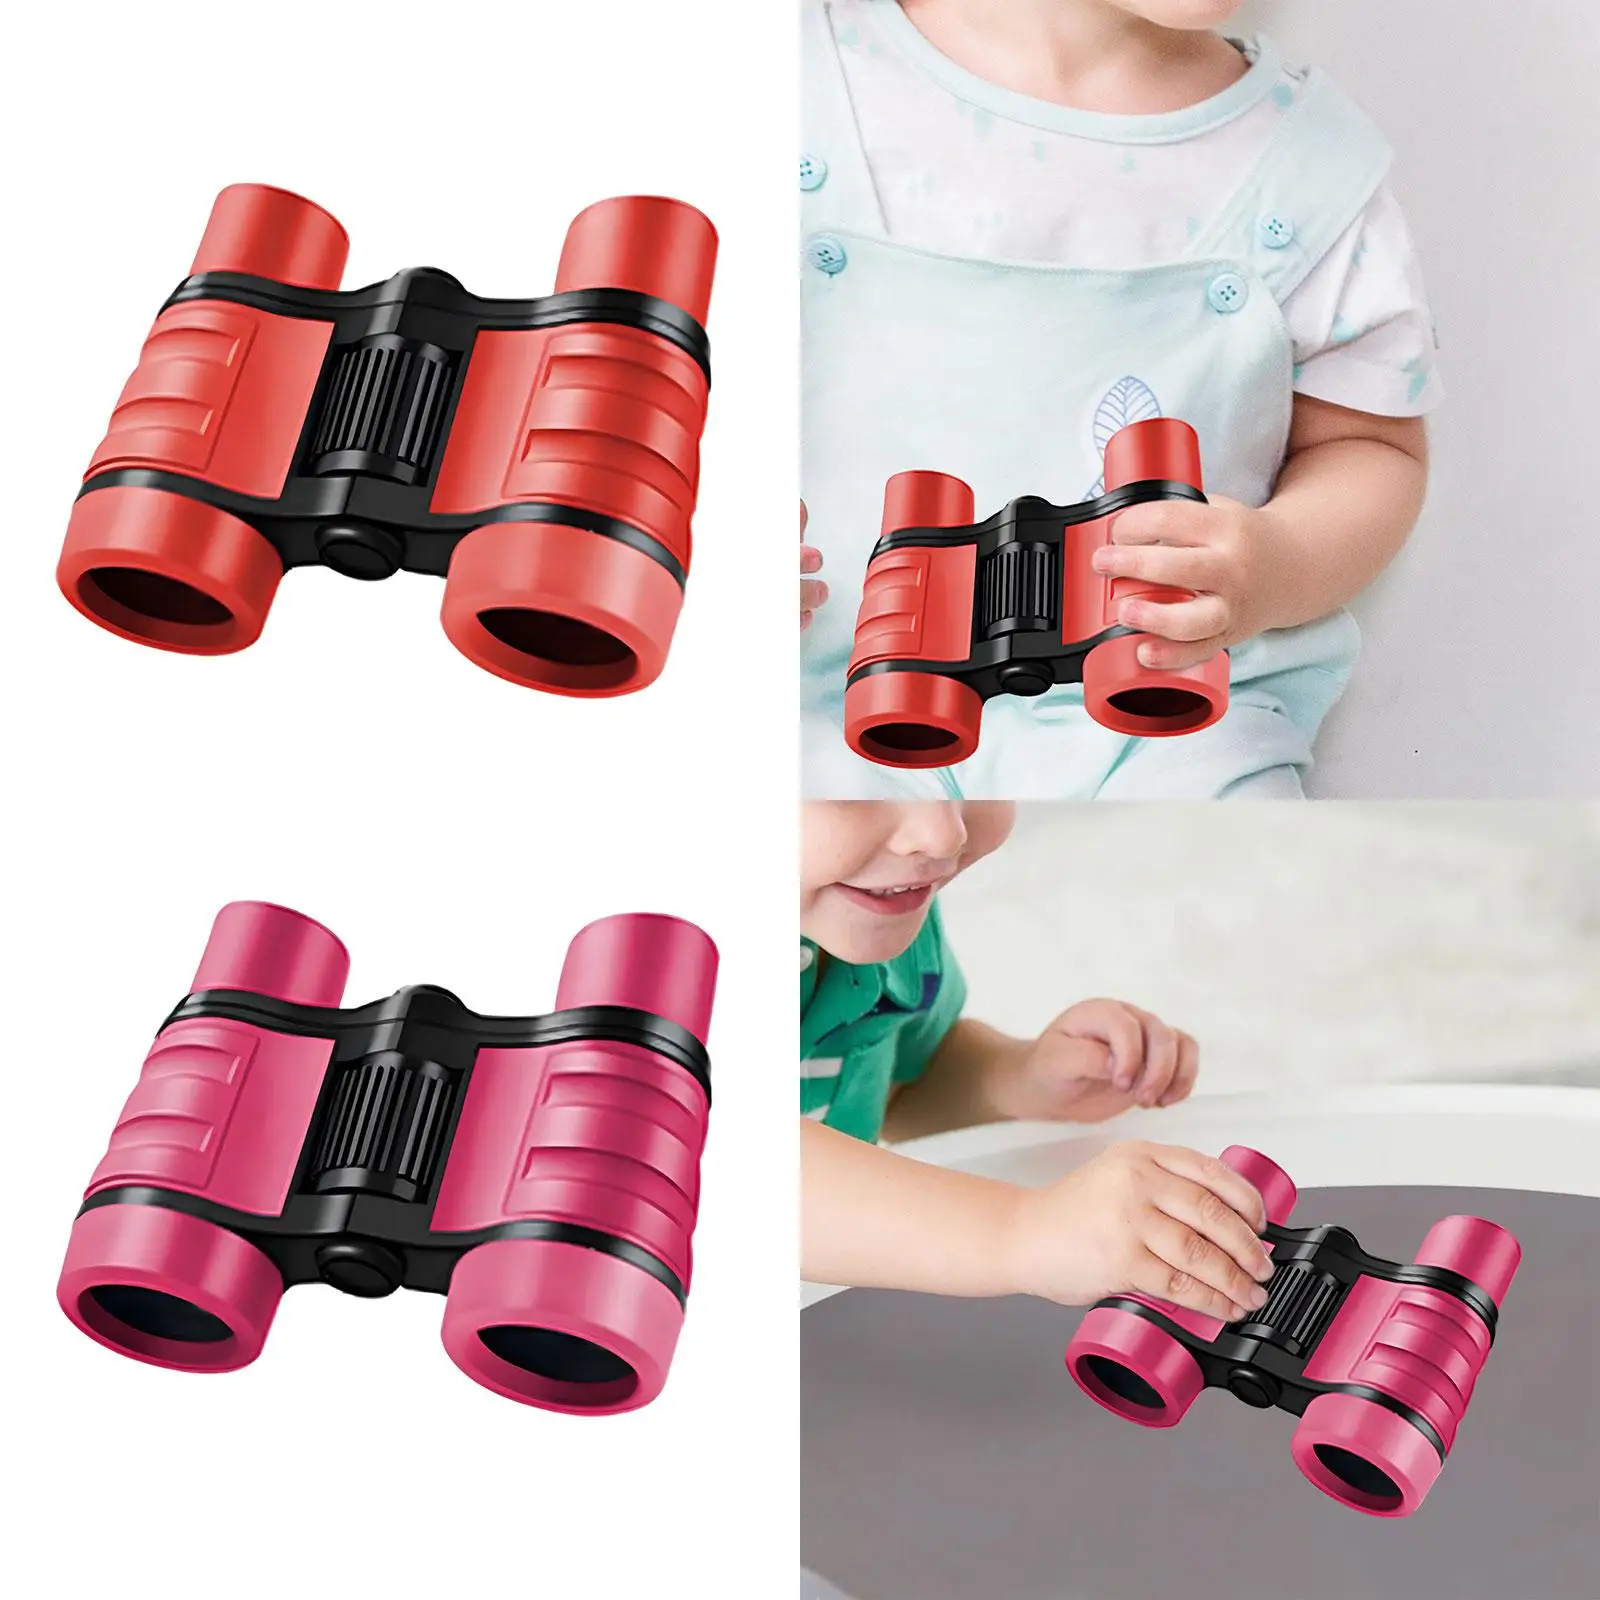 Kids Binoculars Toy 4x30 Bird Watching Children Magnification Toy for Birthday Camping Outdoor Activity Present Party Favors